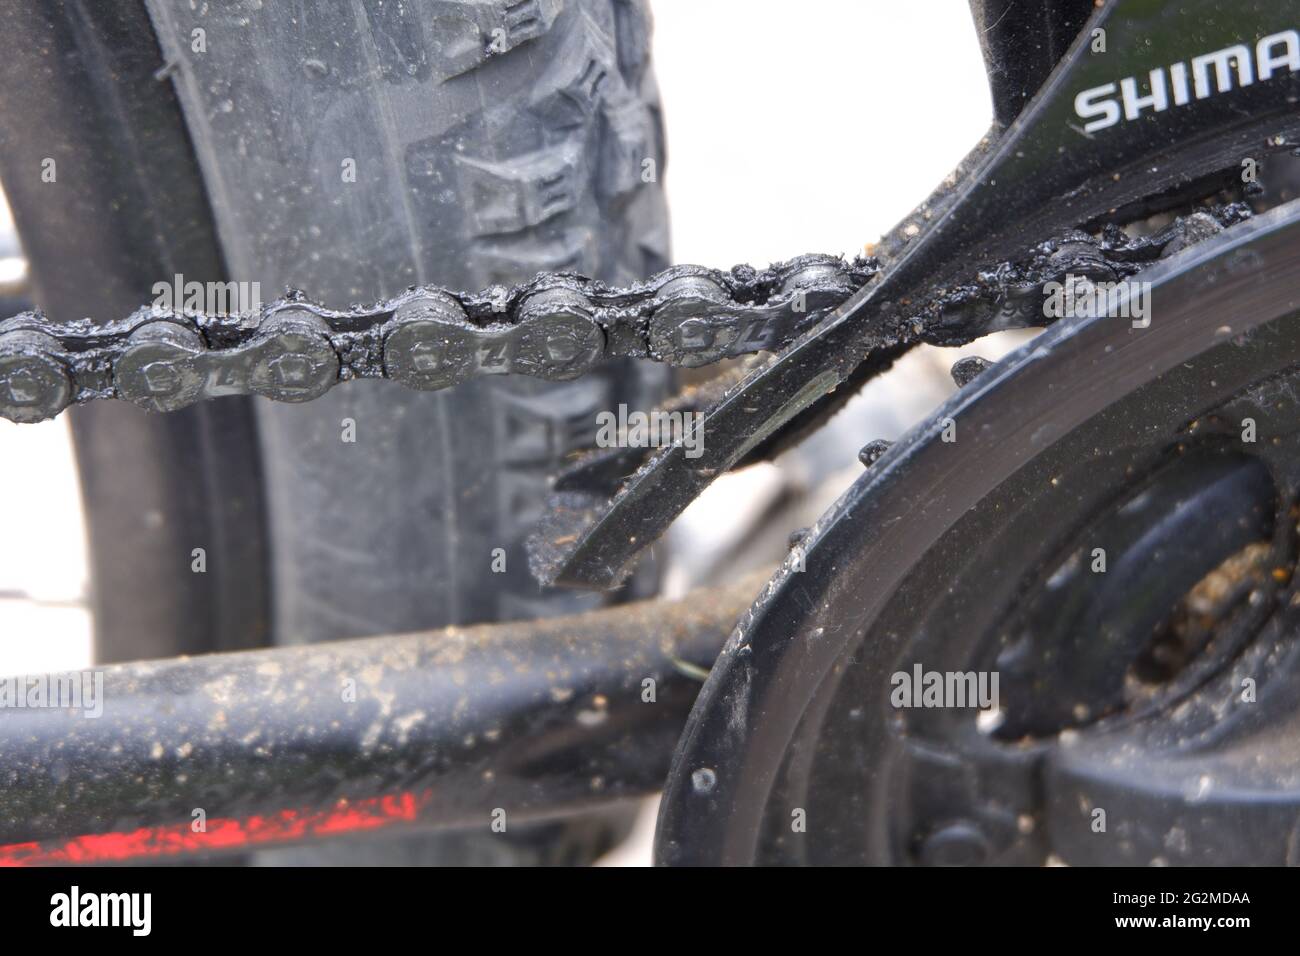 Dirty Bike Chain and crankset Partial View outdoor Stock Photo